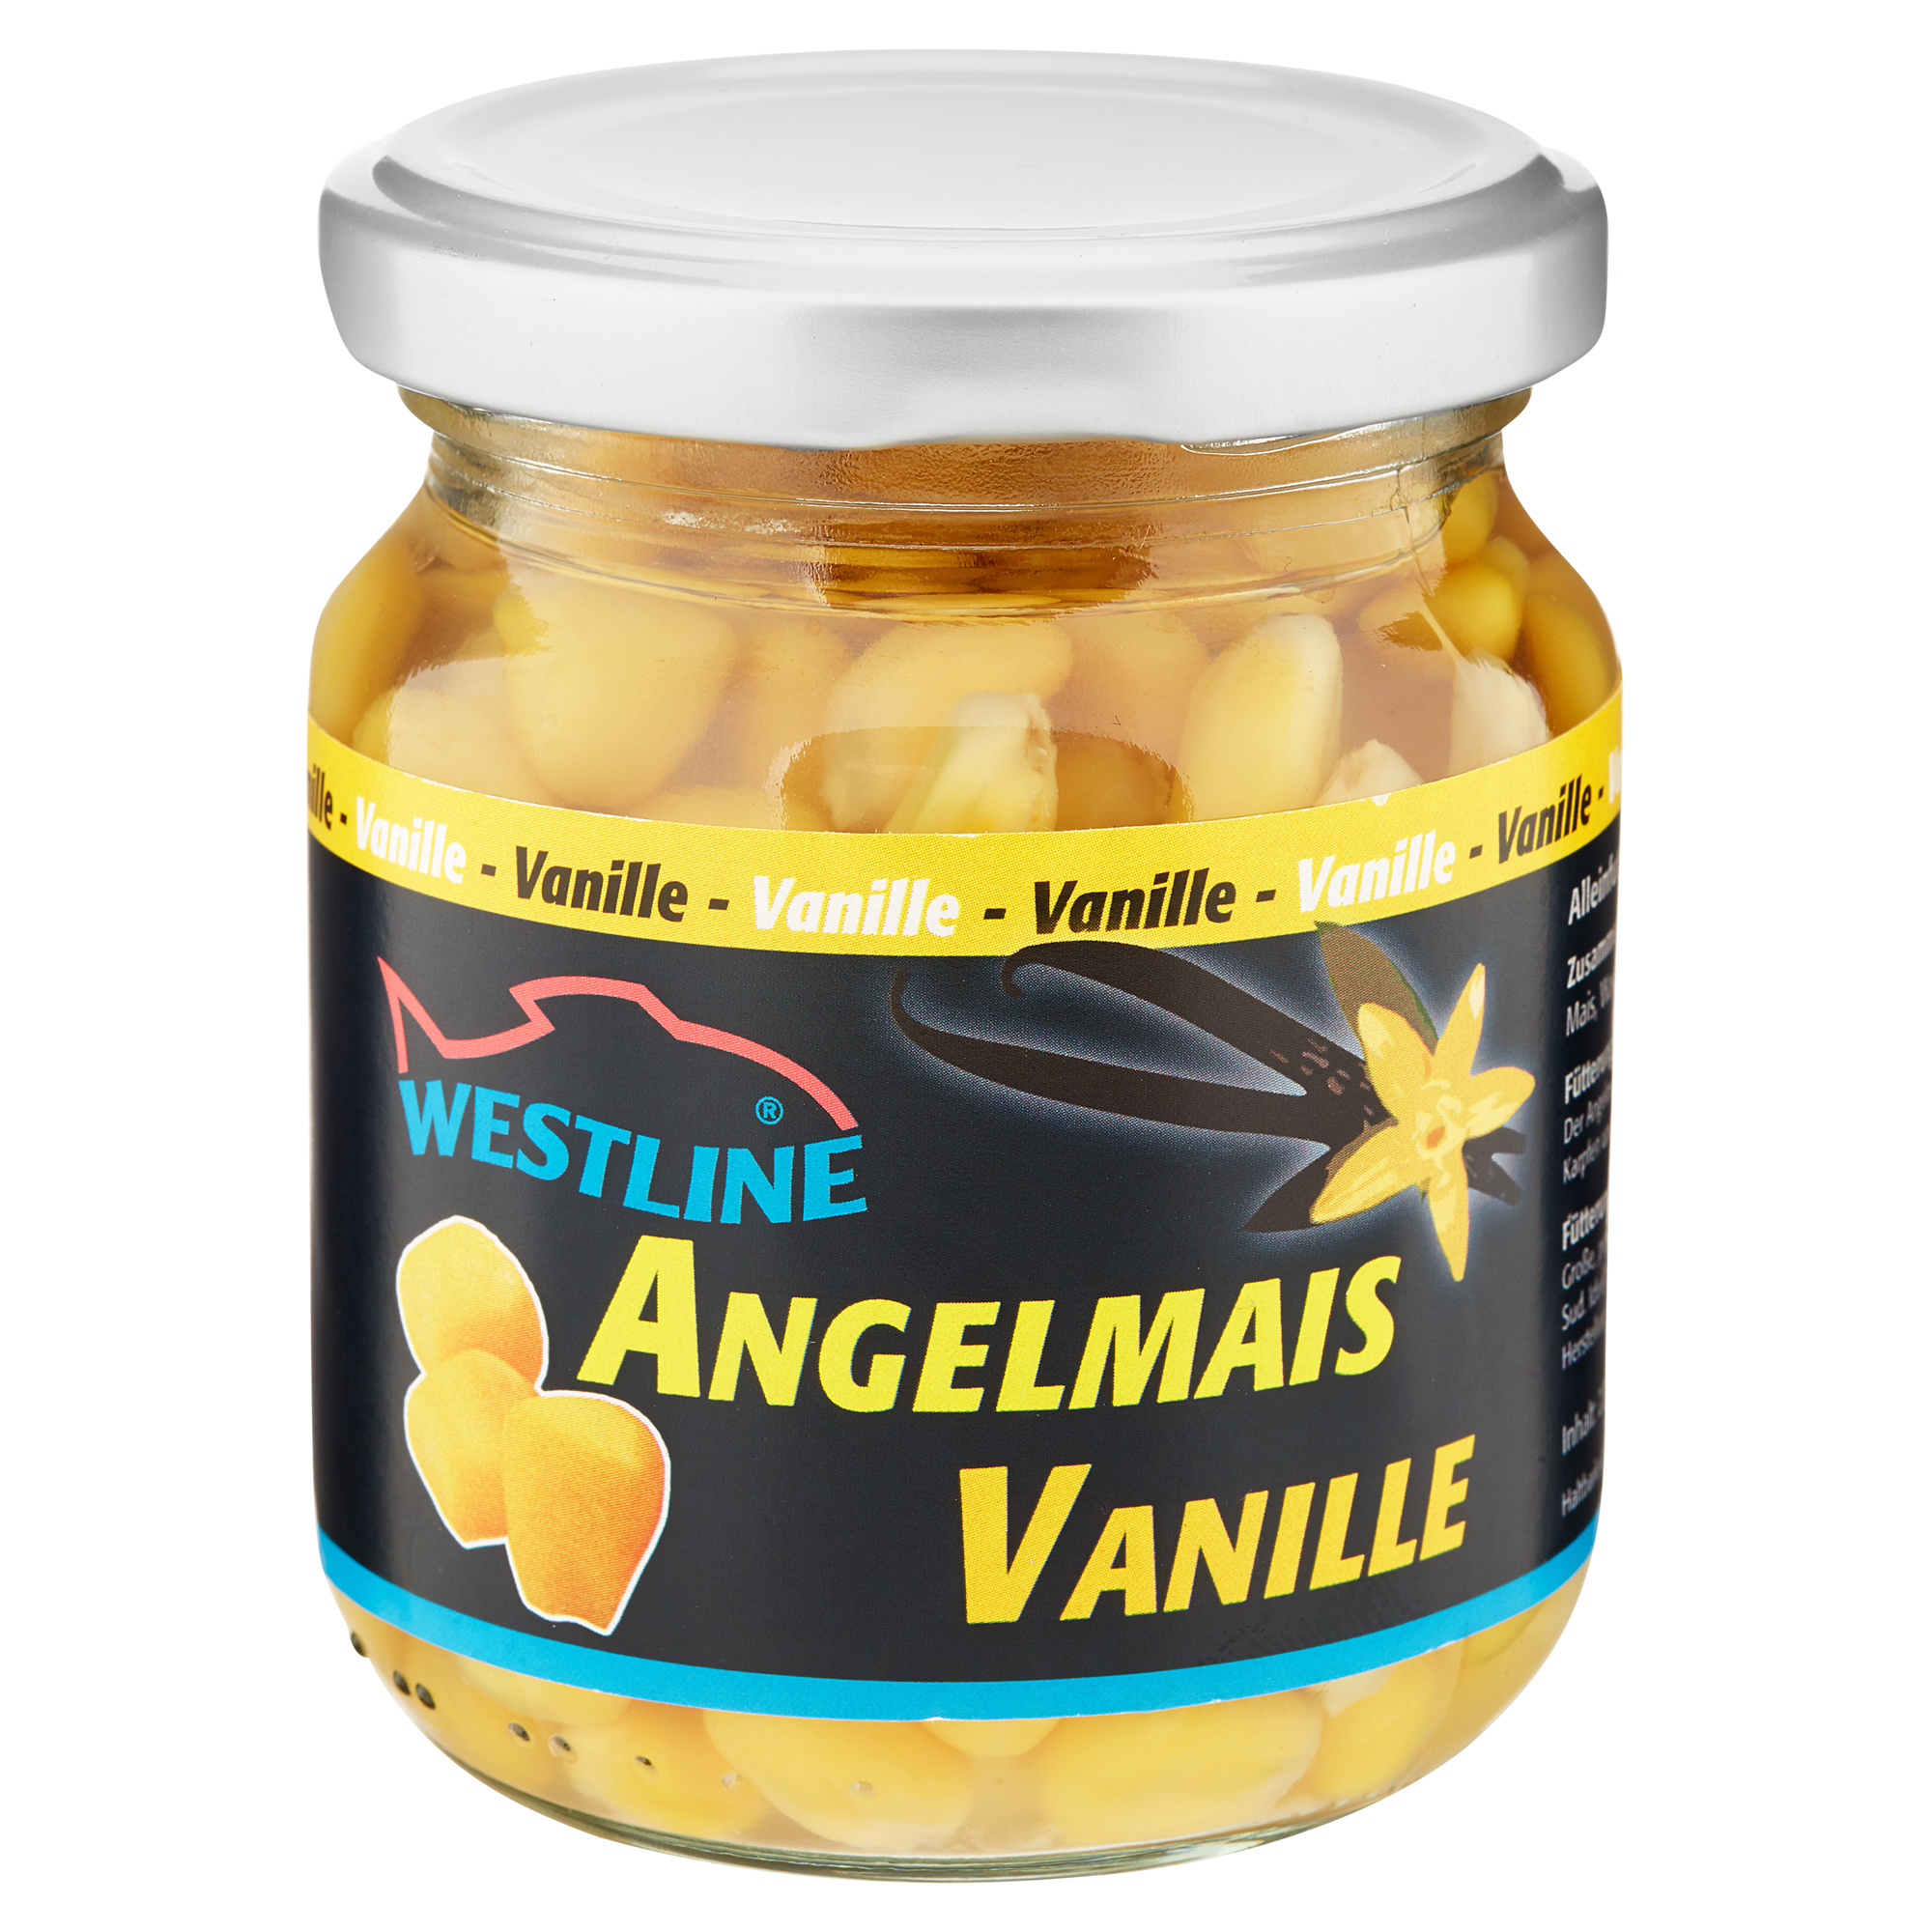 Angelmais 220 ml Vanille gelb + product picture